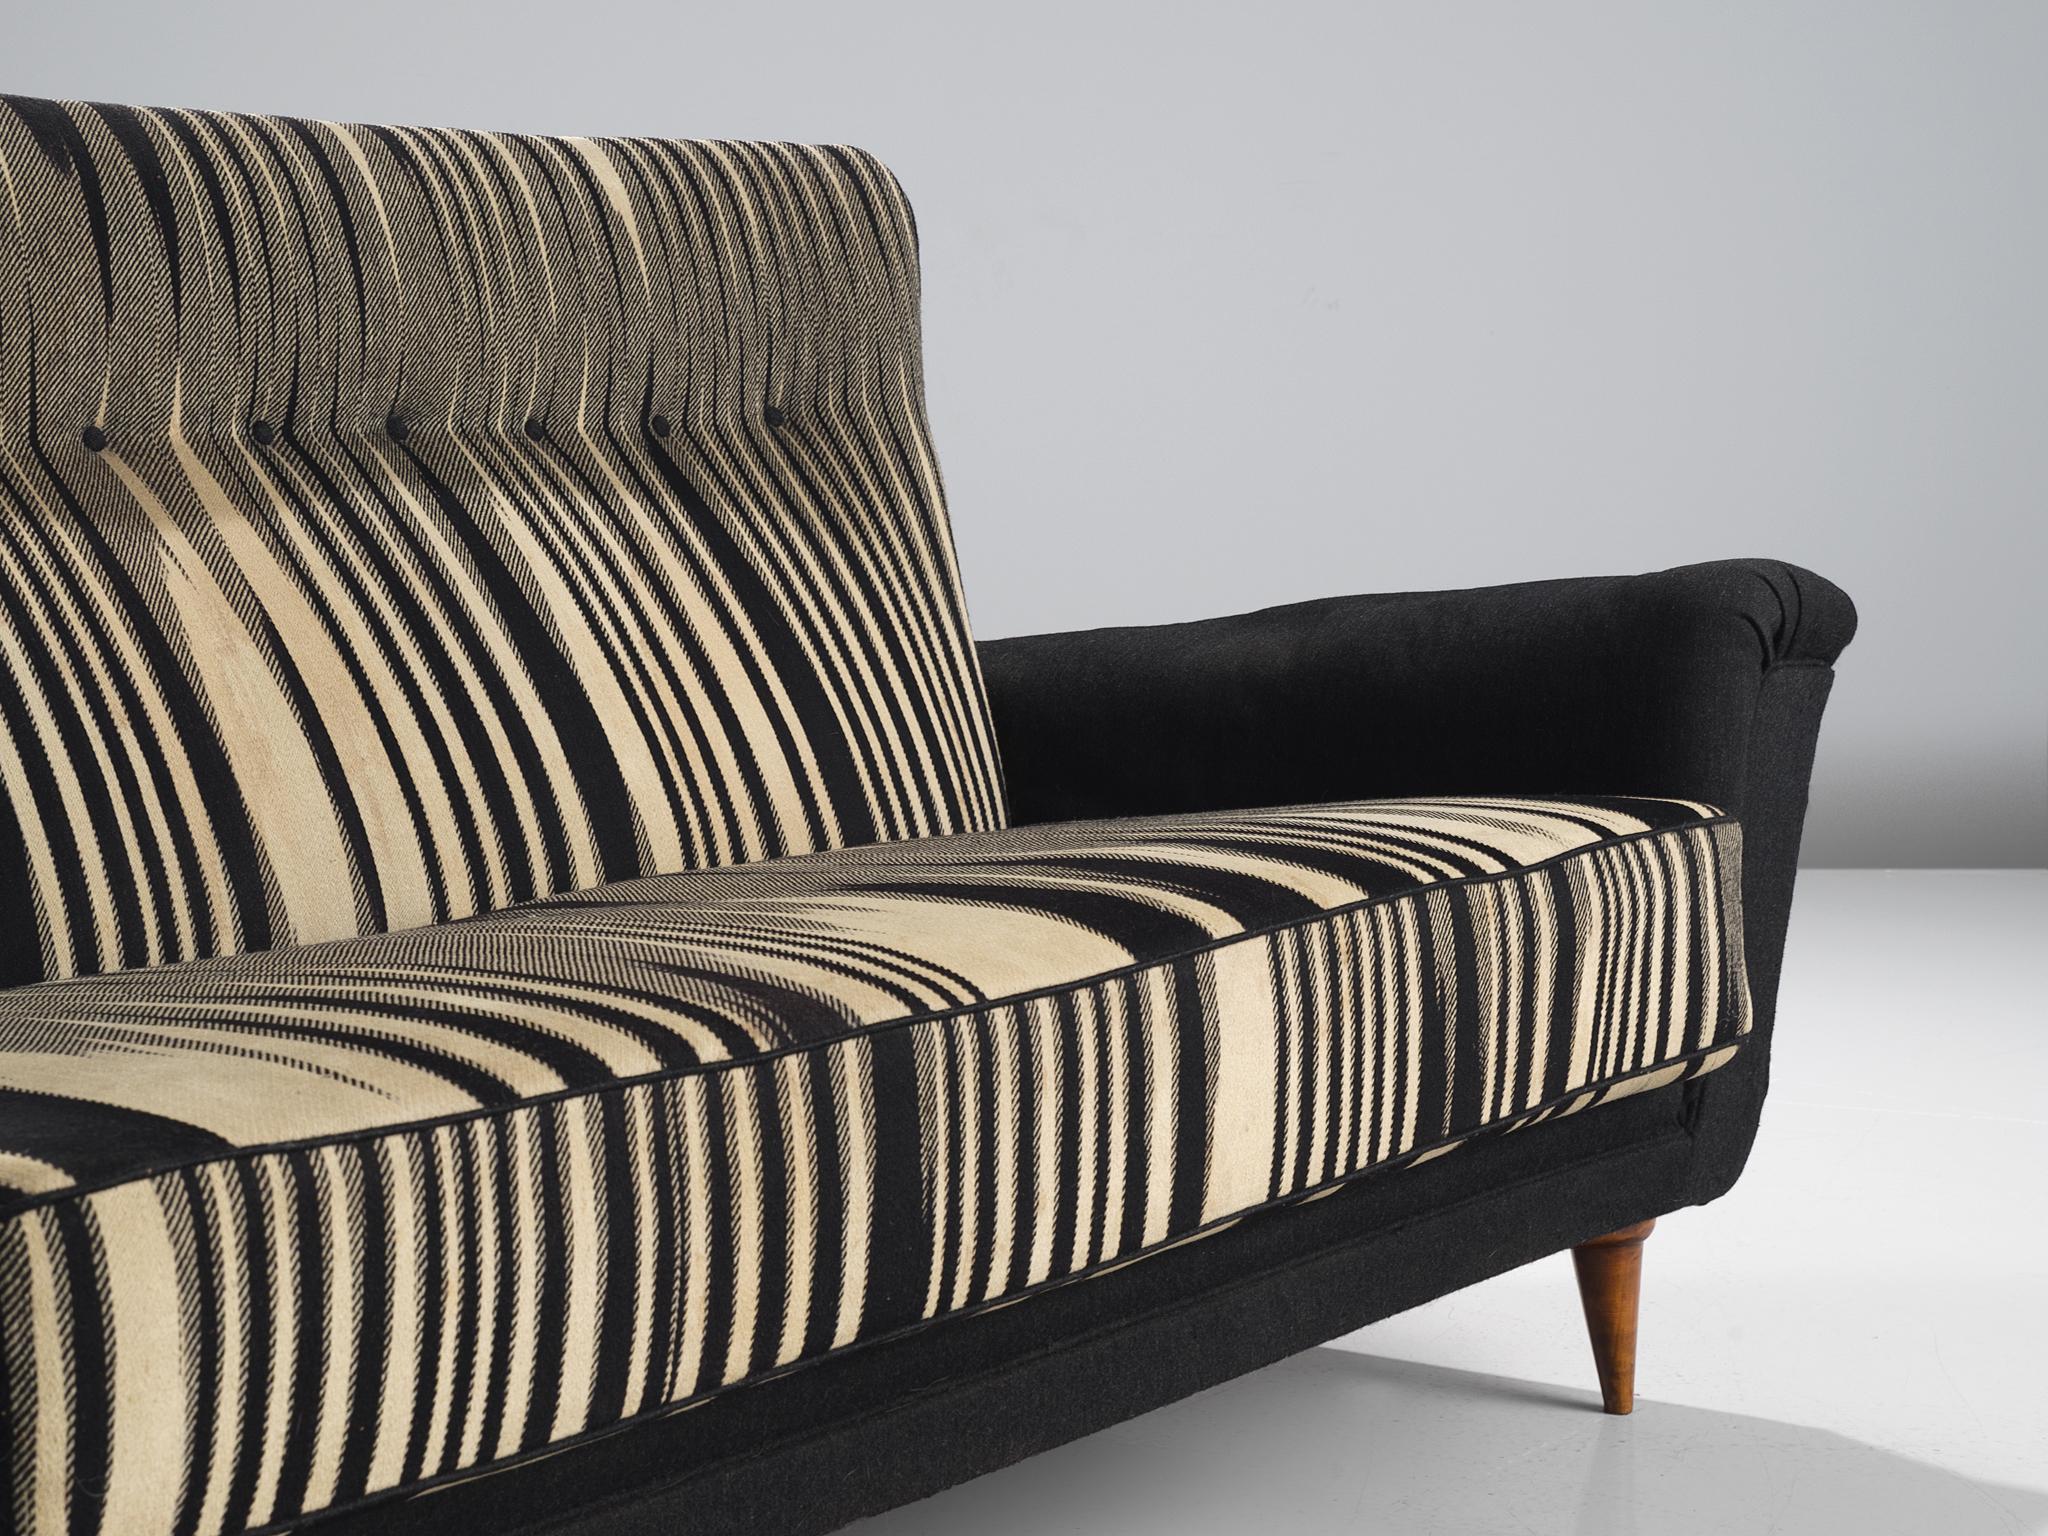 Fabric Dutch Sofa in Striped Black and White Upholstery